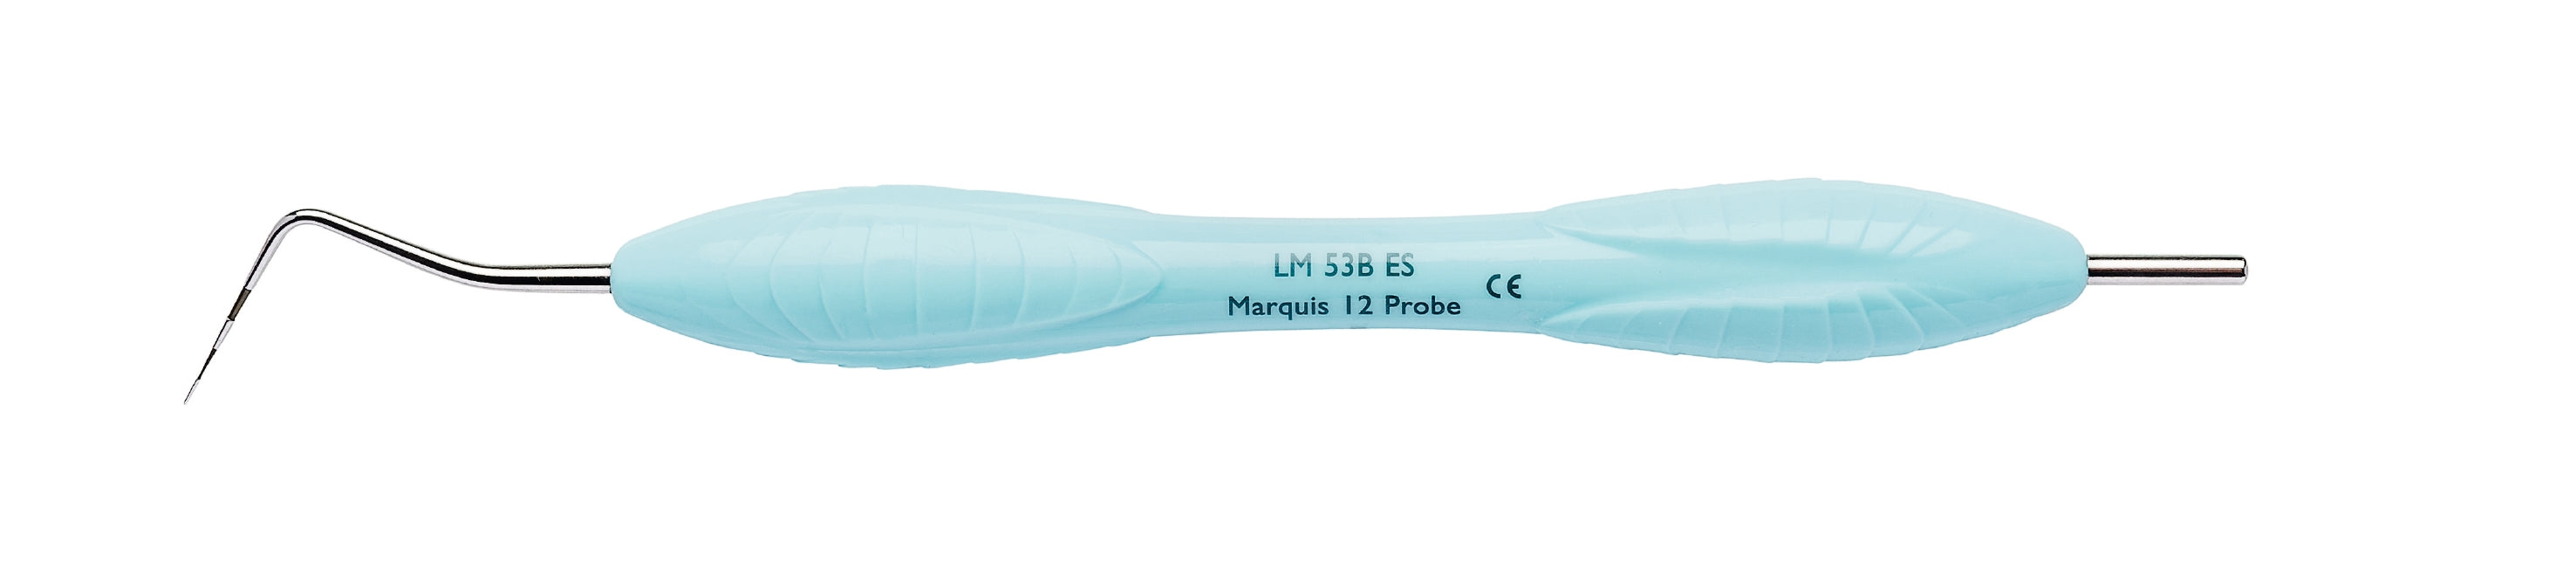 LM 53BES Marquis 12 Probe